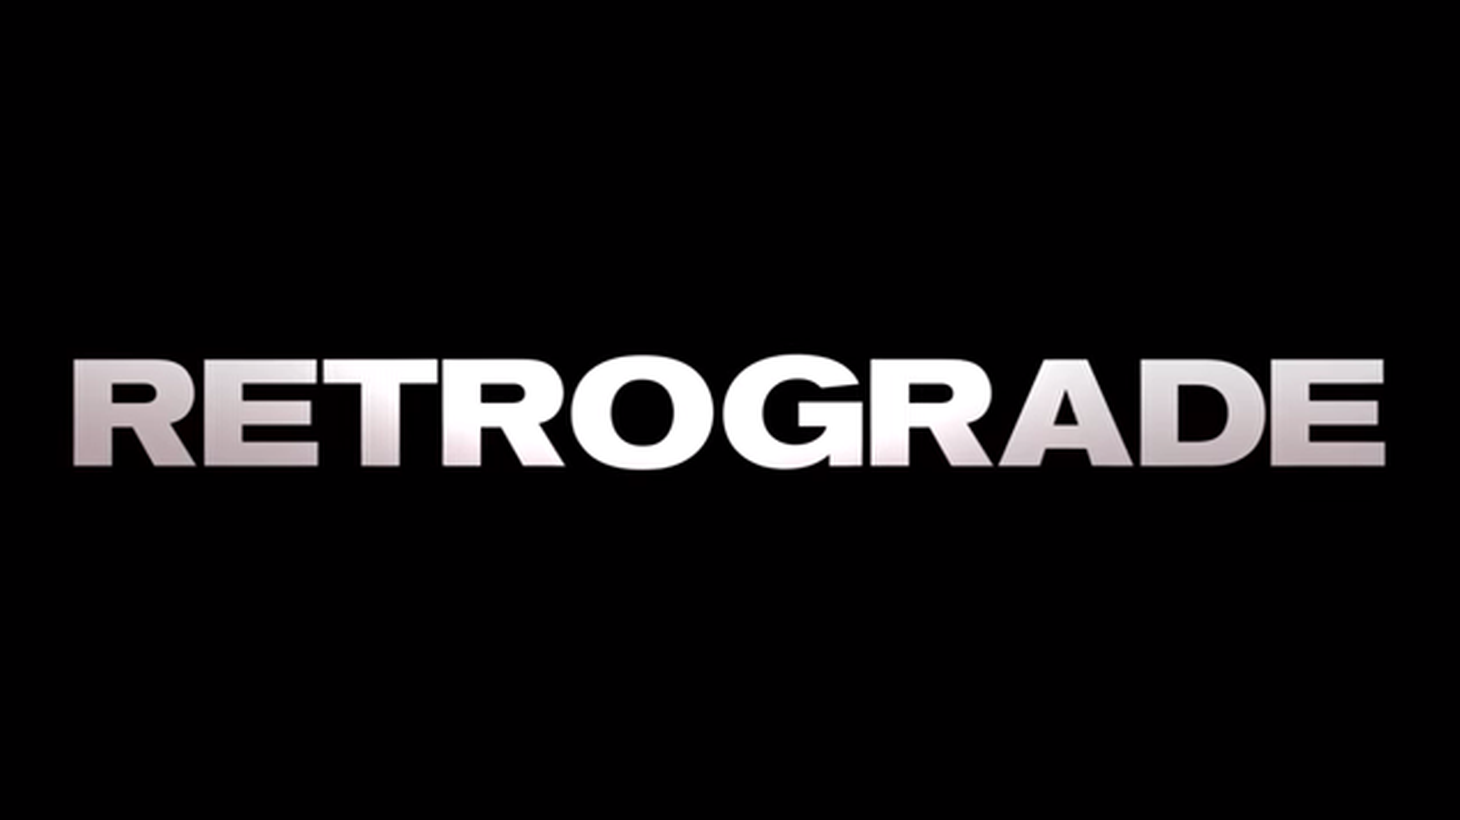 “Retrograde” documents the final months of America’s two-decades-long war in Afghanistan.